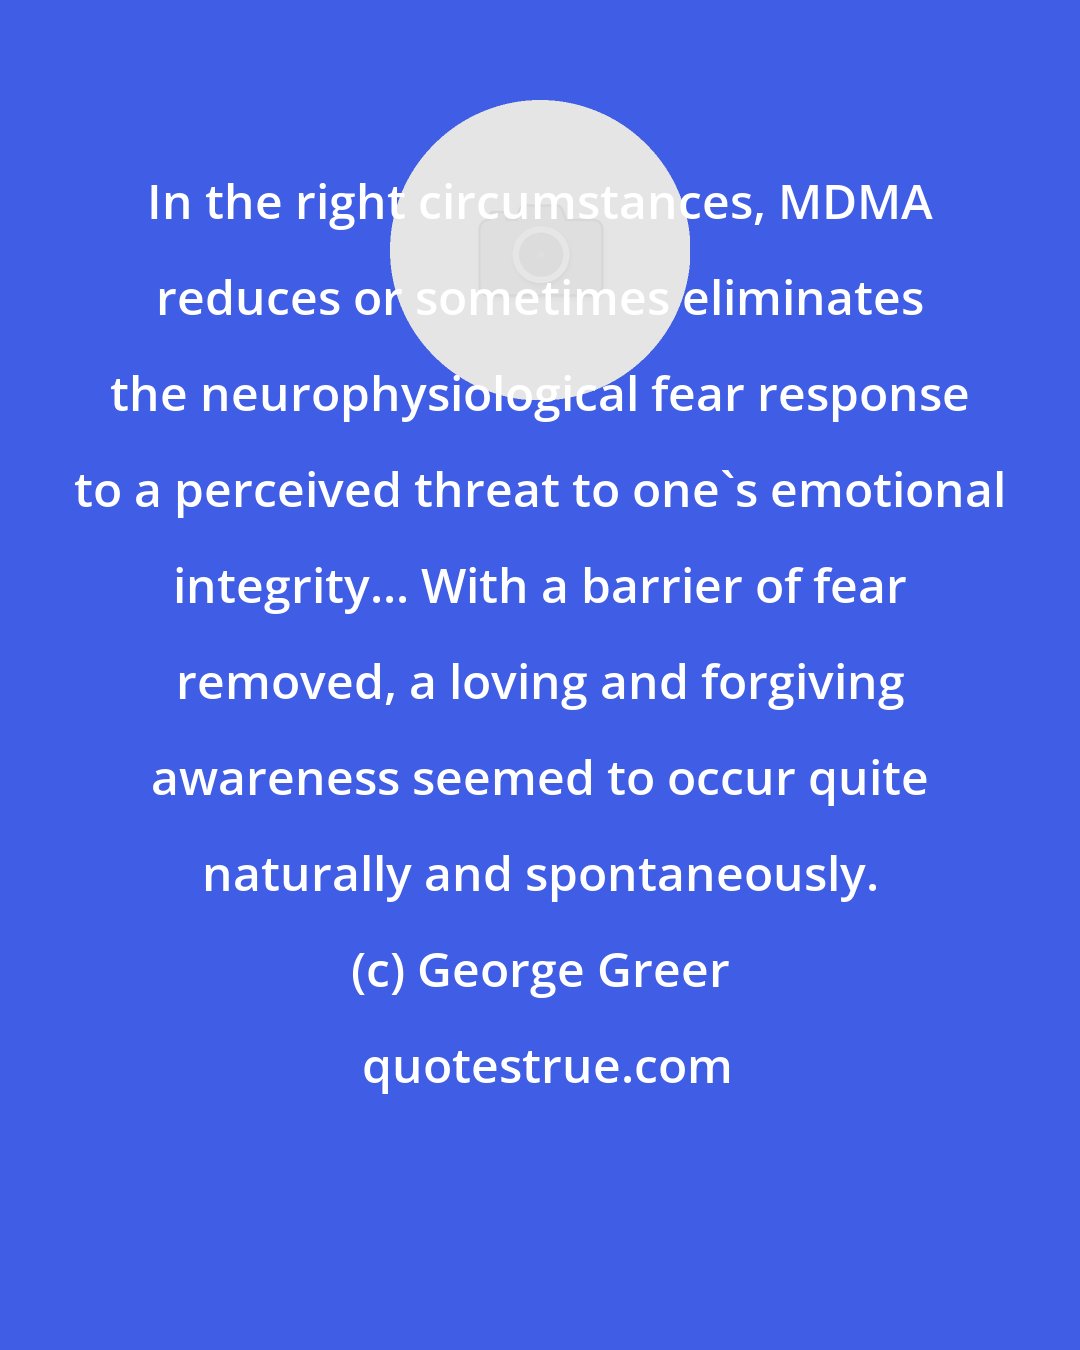 George Greer: In the right circumstances, MDMA reduces or sometimes eliminates the neurophysiological fear response to a perceived threat to one's emotional integrity... With a barrier of fear removed, a loving and forgiving awareness seemed to occur quite naturally and spontaneously.